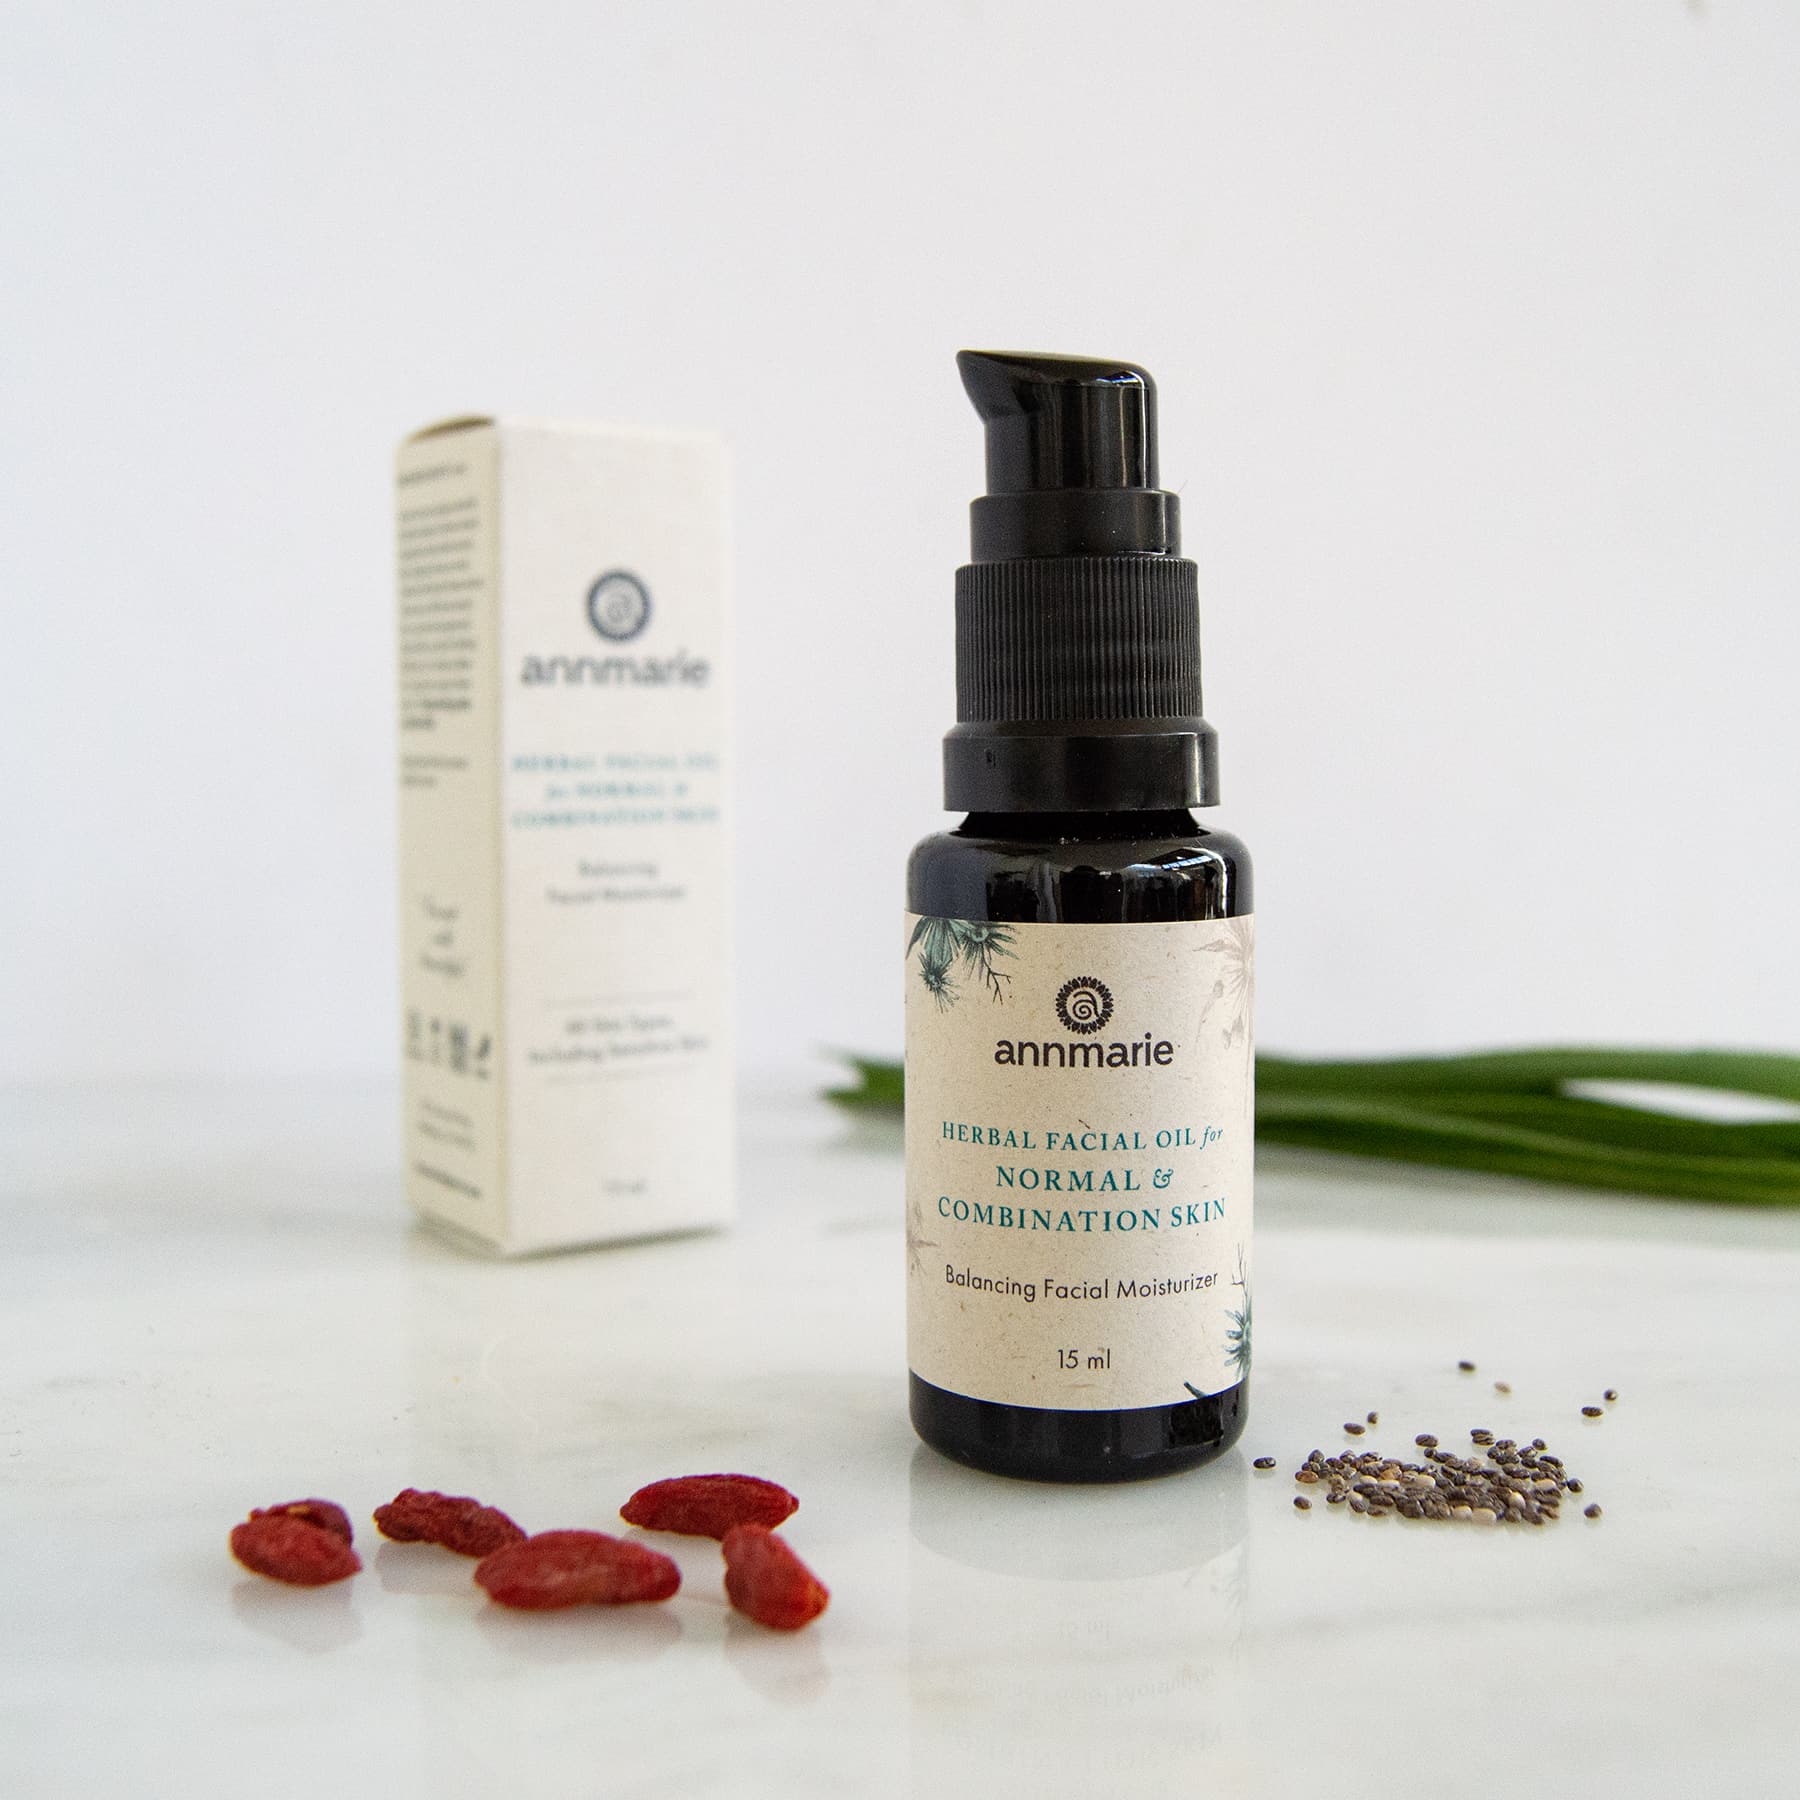 Annmarie Skincare Herbal Facial Oil (Normal + Combination Skin) MADE SAFE